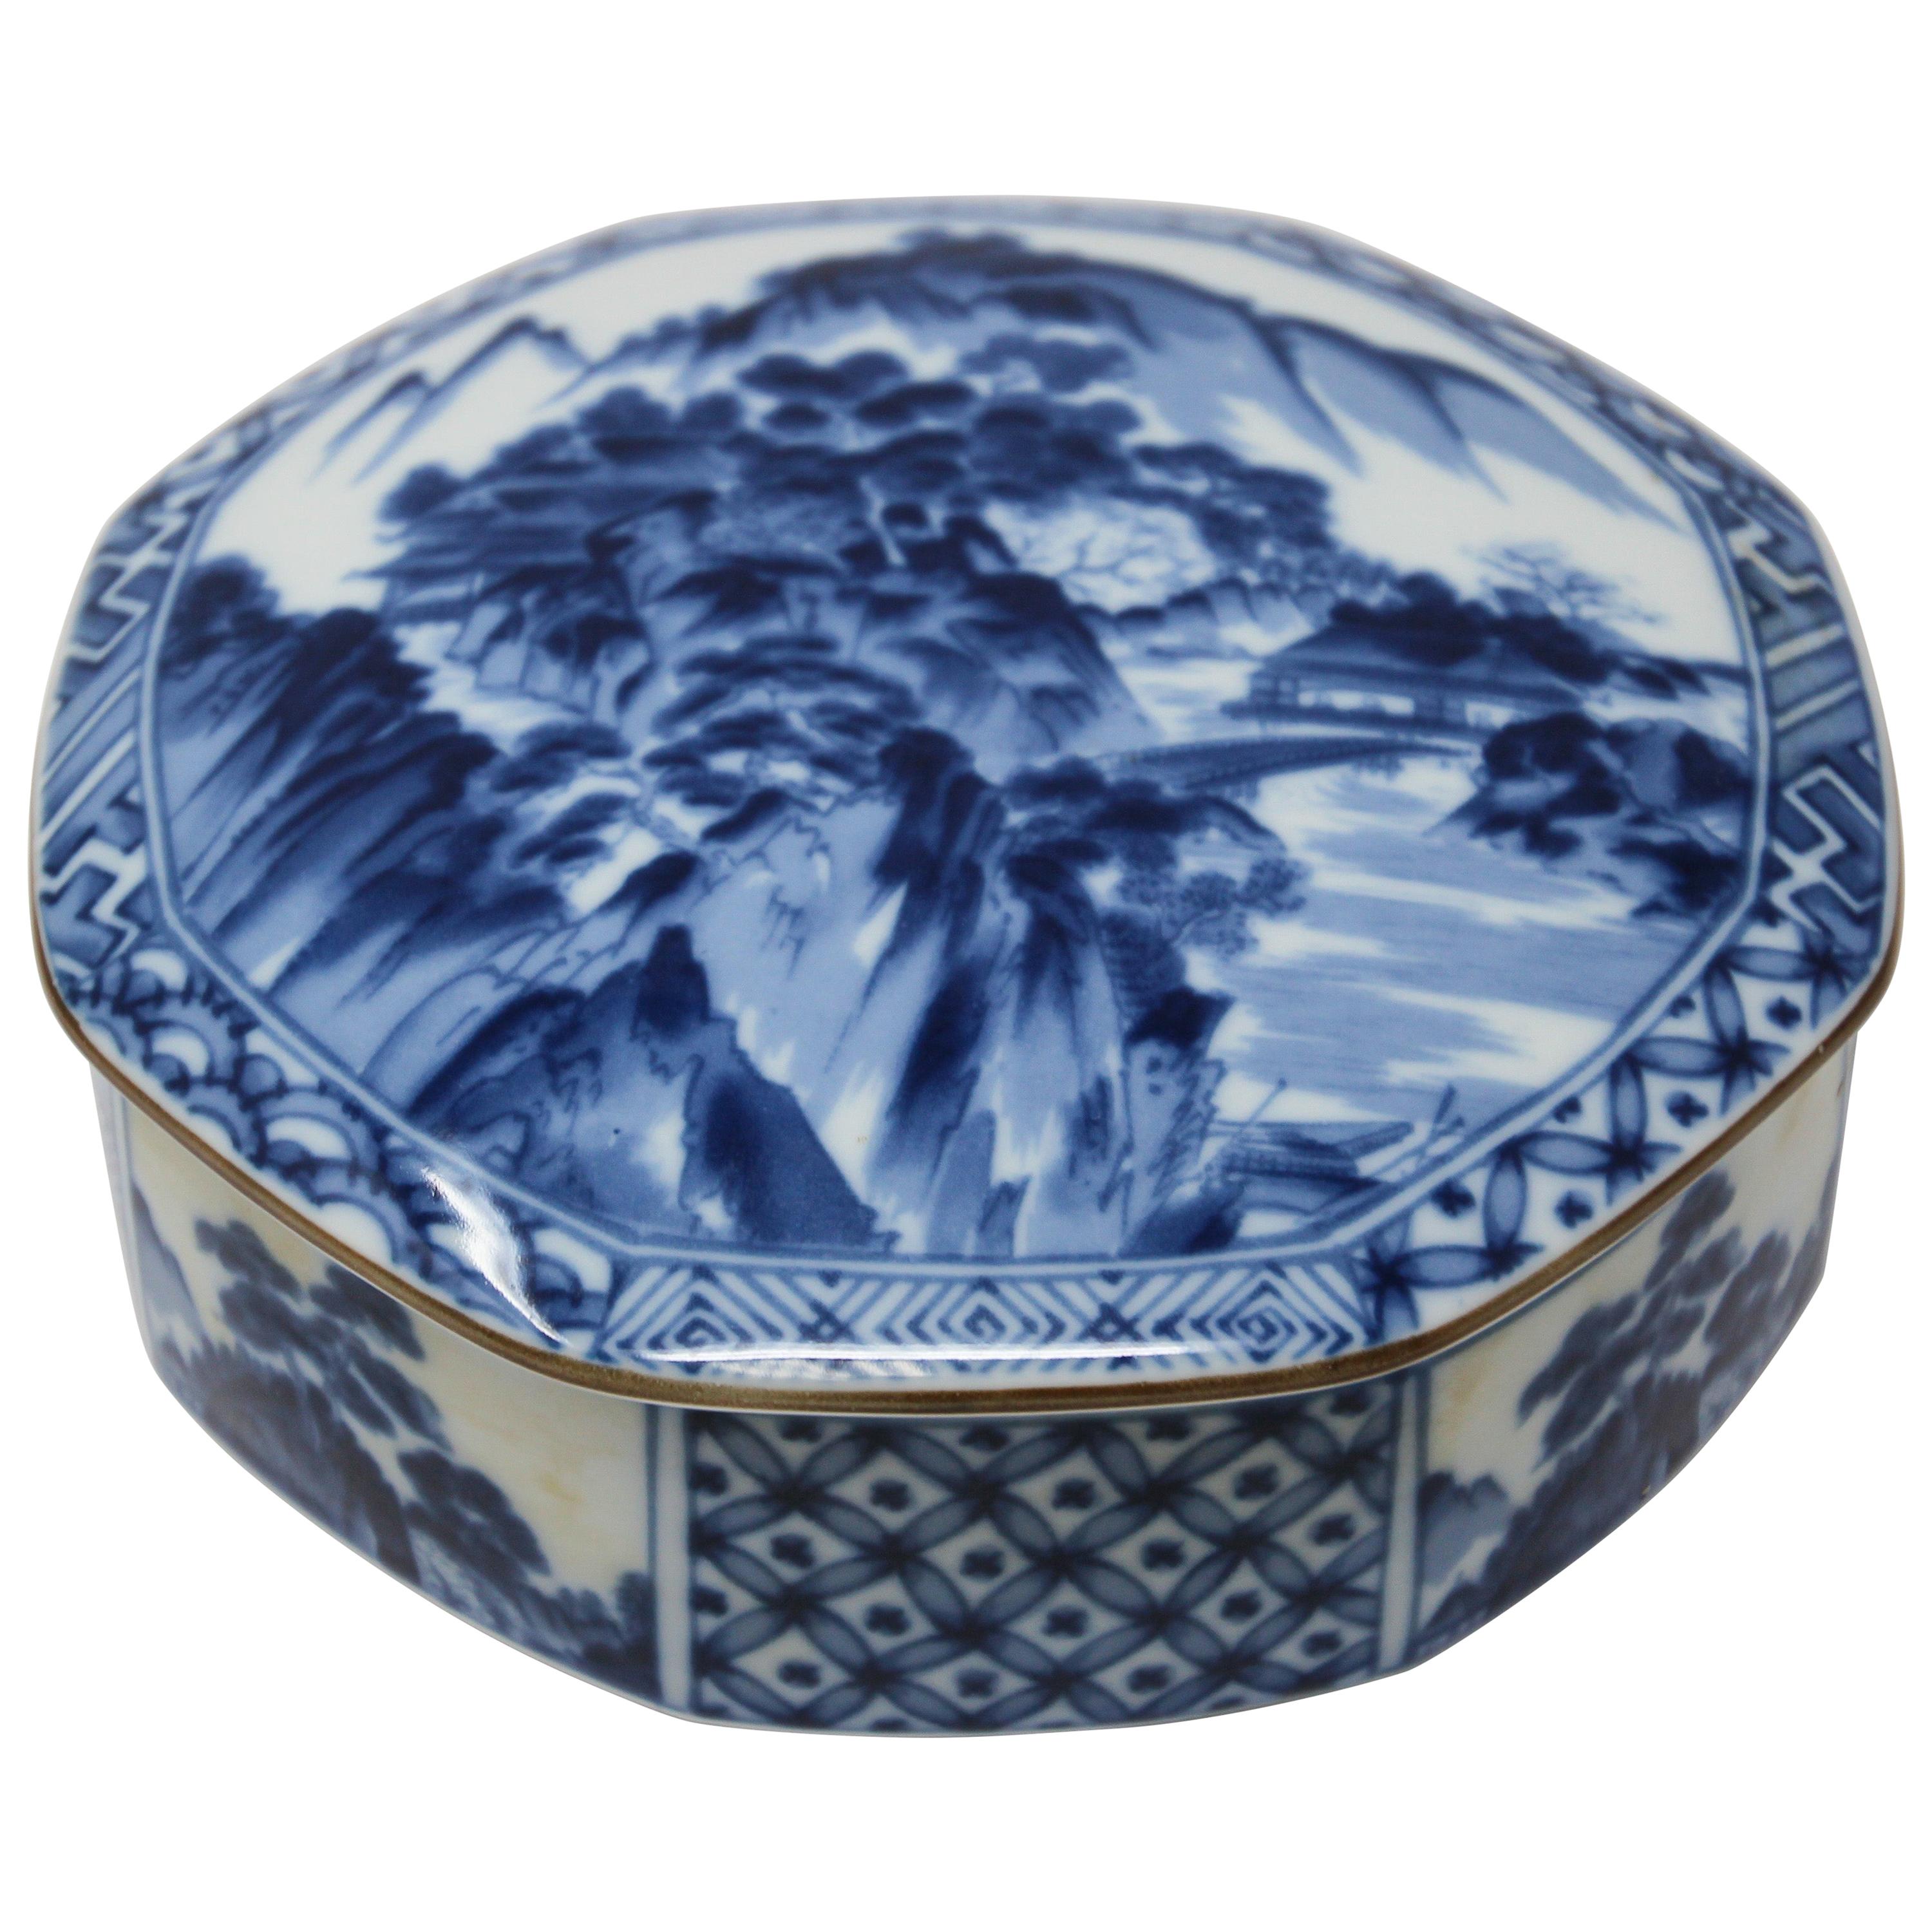 Tiffany & Co. Porcelain Lidded Trinket Box with a Chinese Blue and White Decor